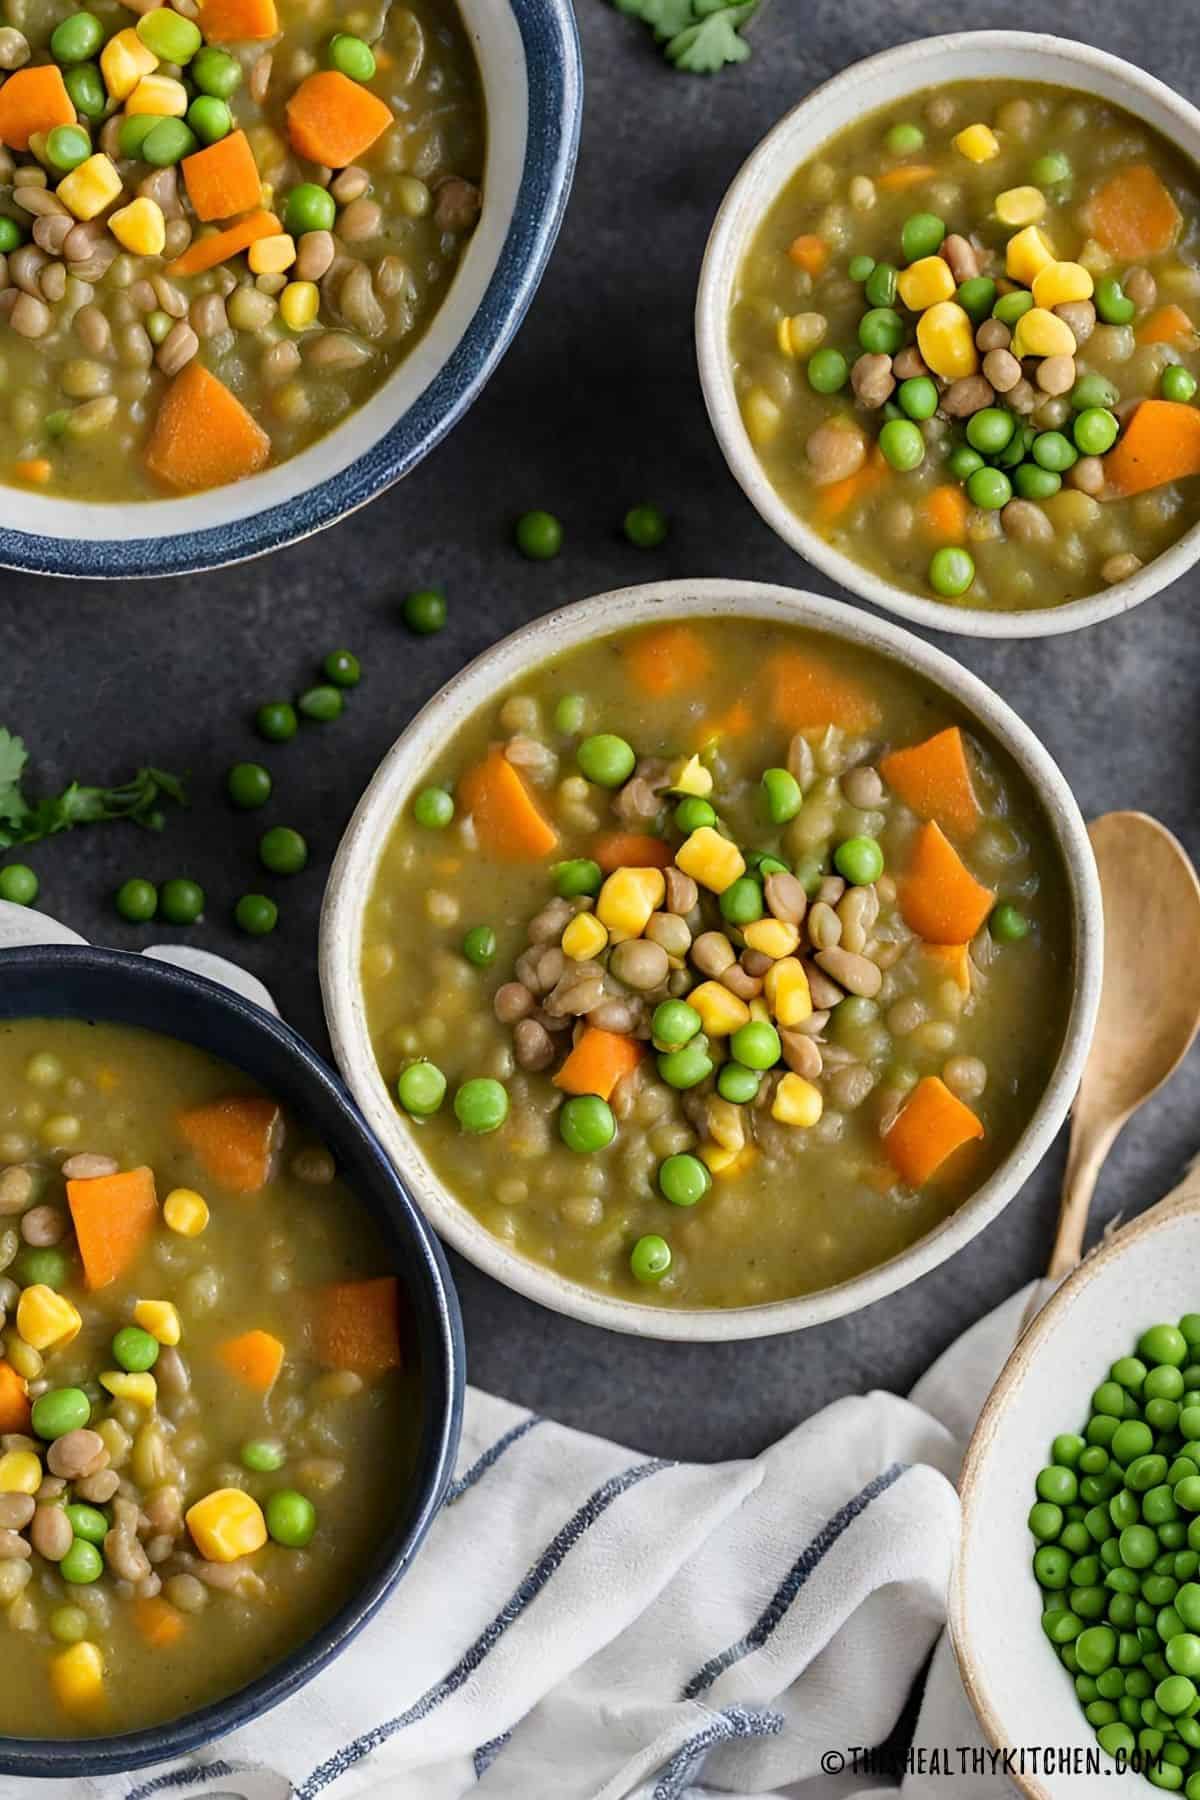 Lentil split pea soup in bowls with green peas in another bowl.